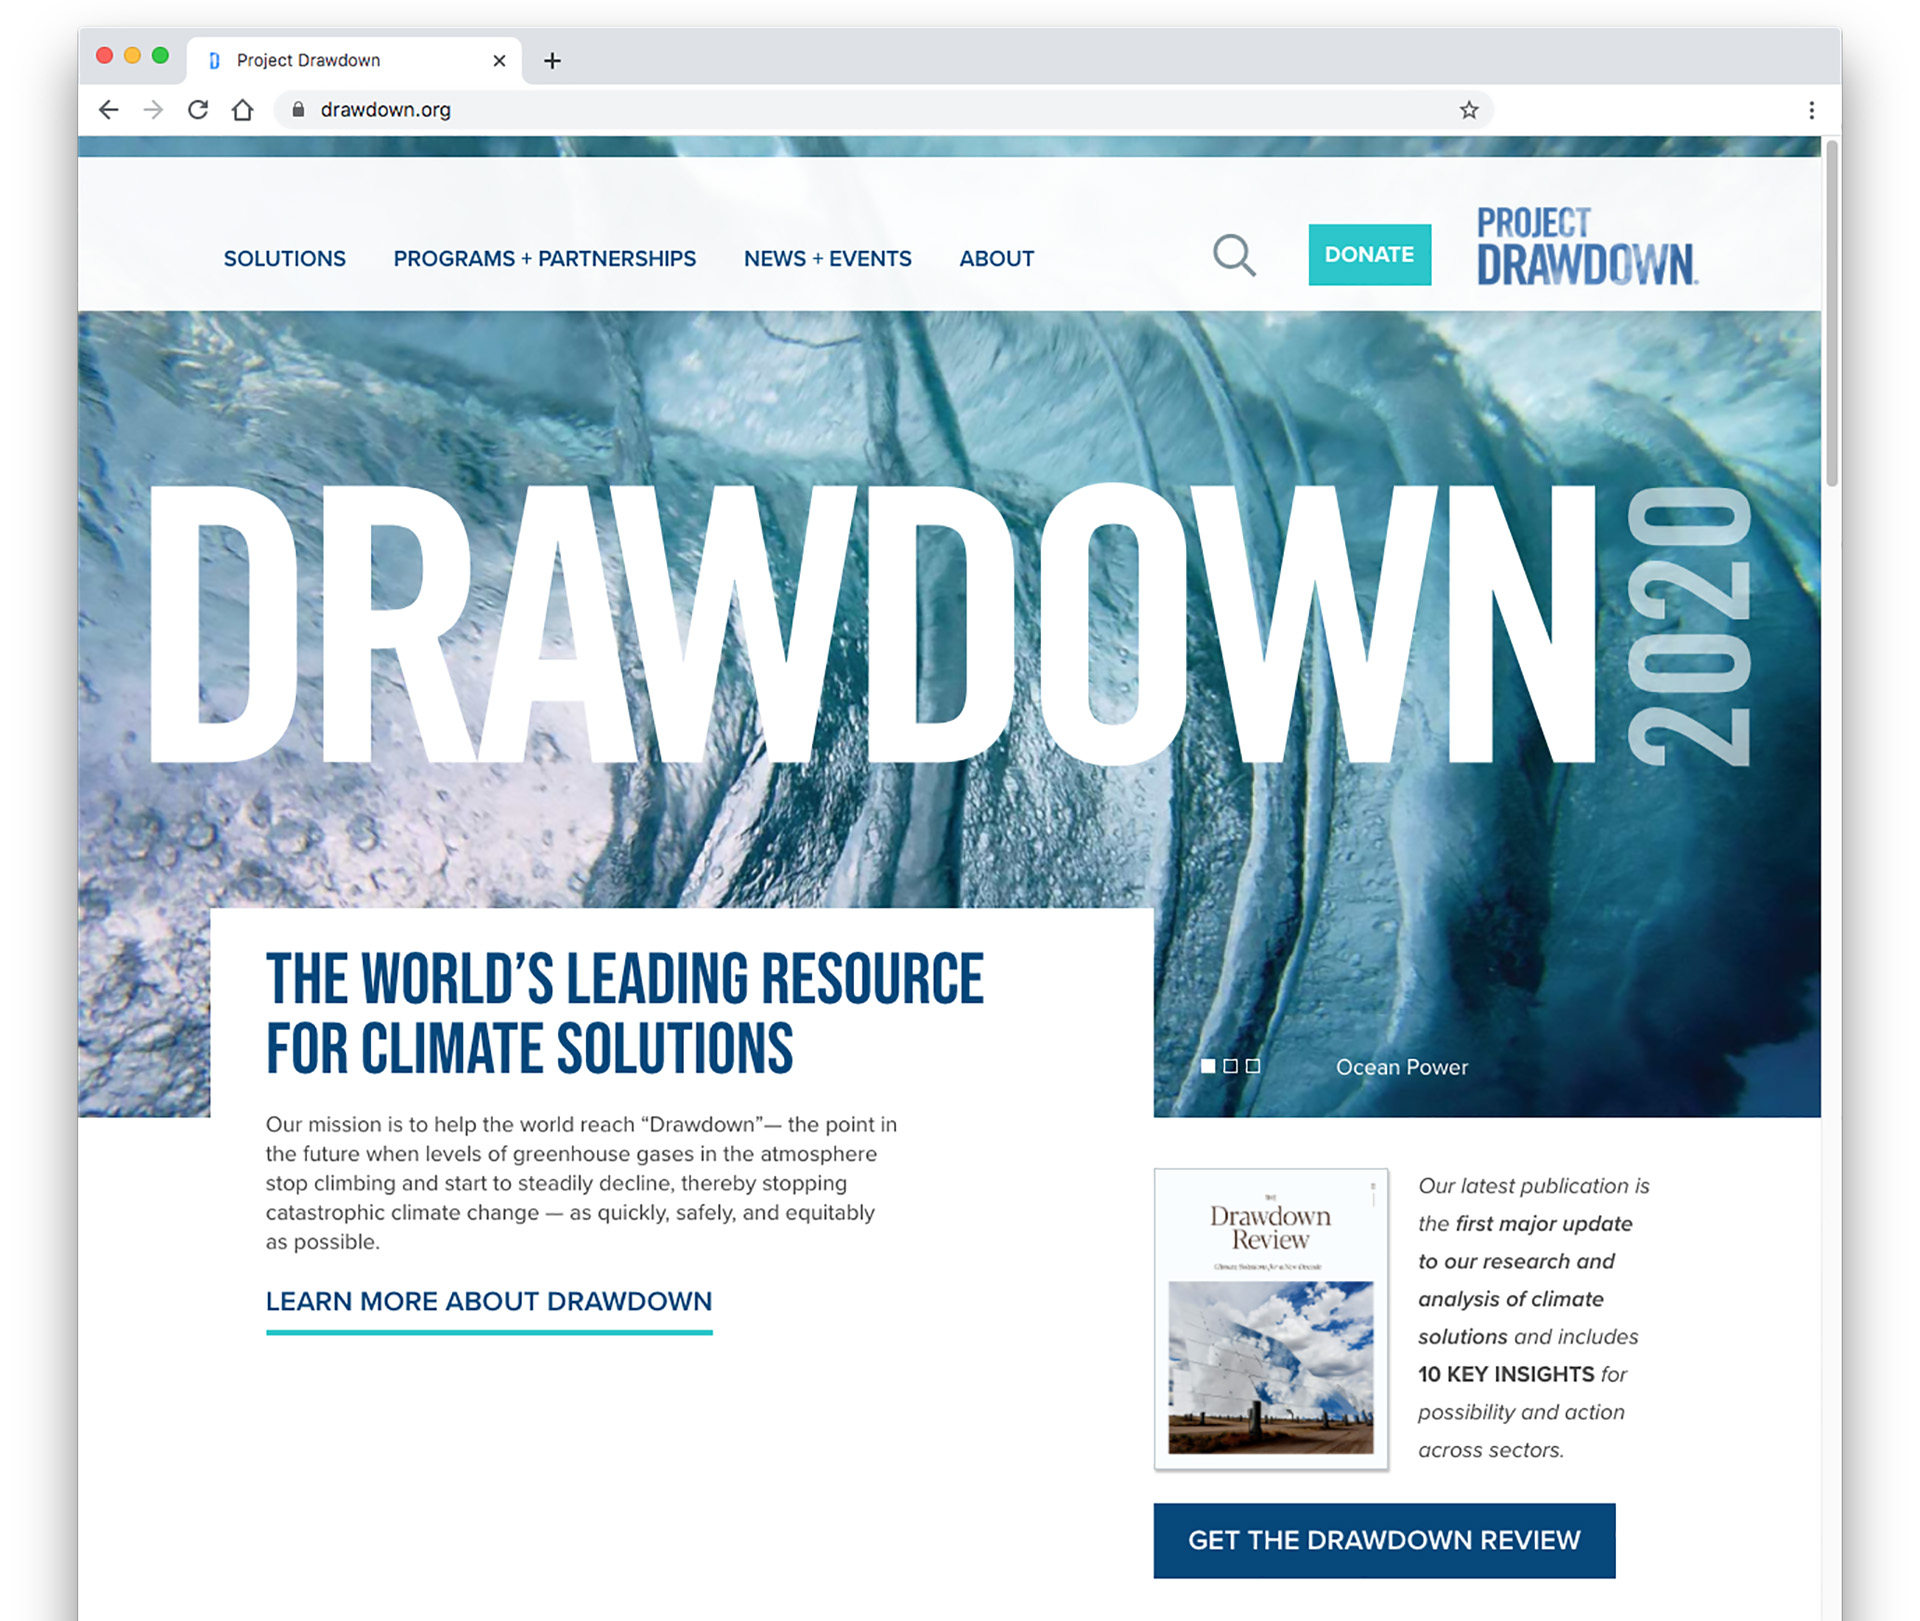 Screenshot of the drawdown.org website home page